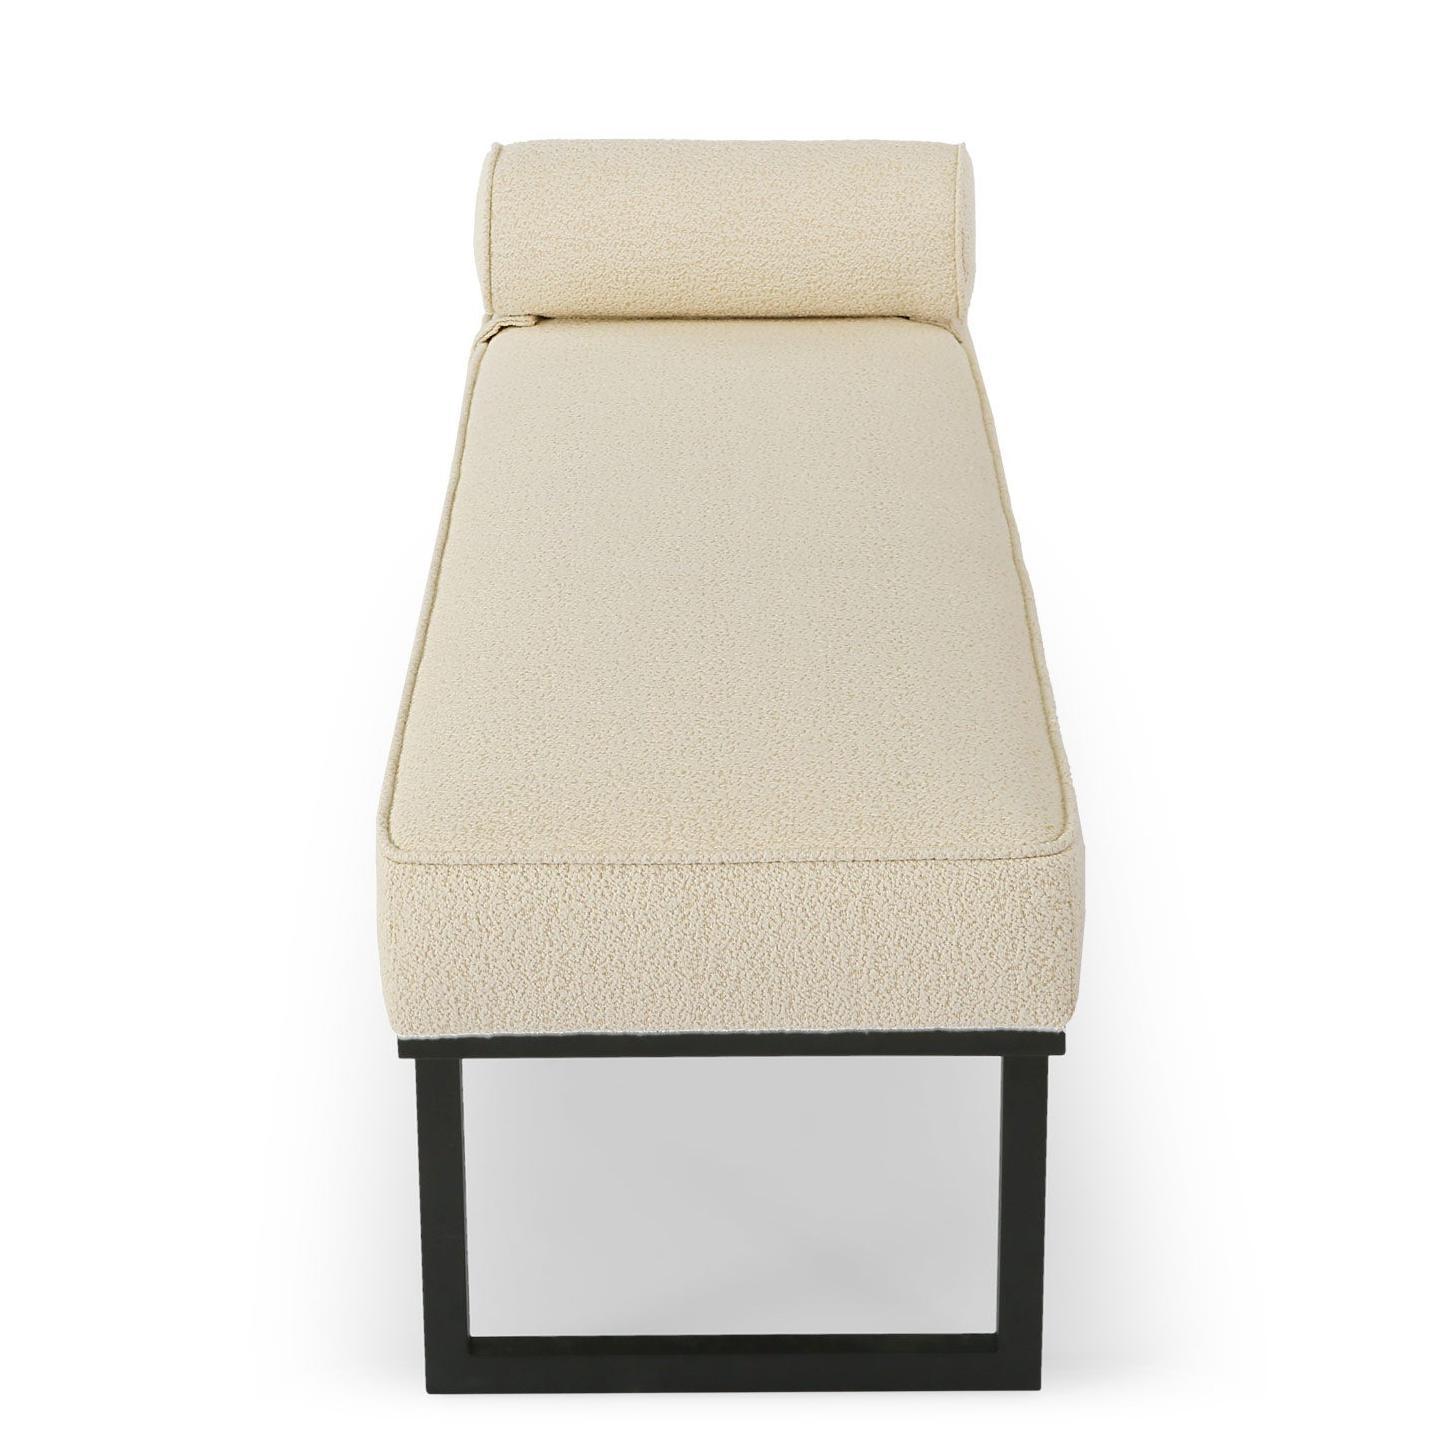 Sleek Extra Long Ottoman For Contemporary Bedroom Featured Image